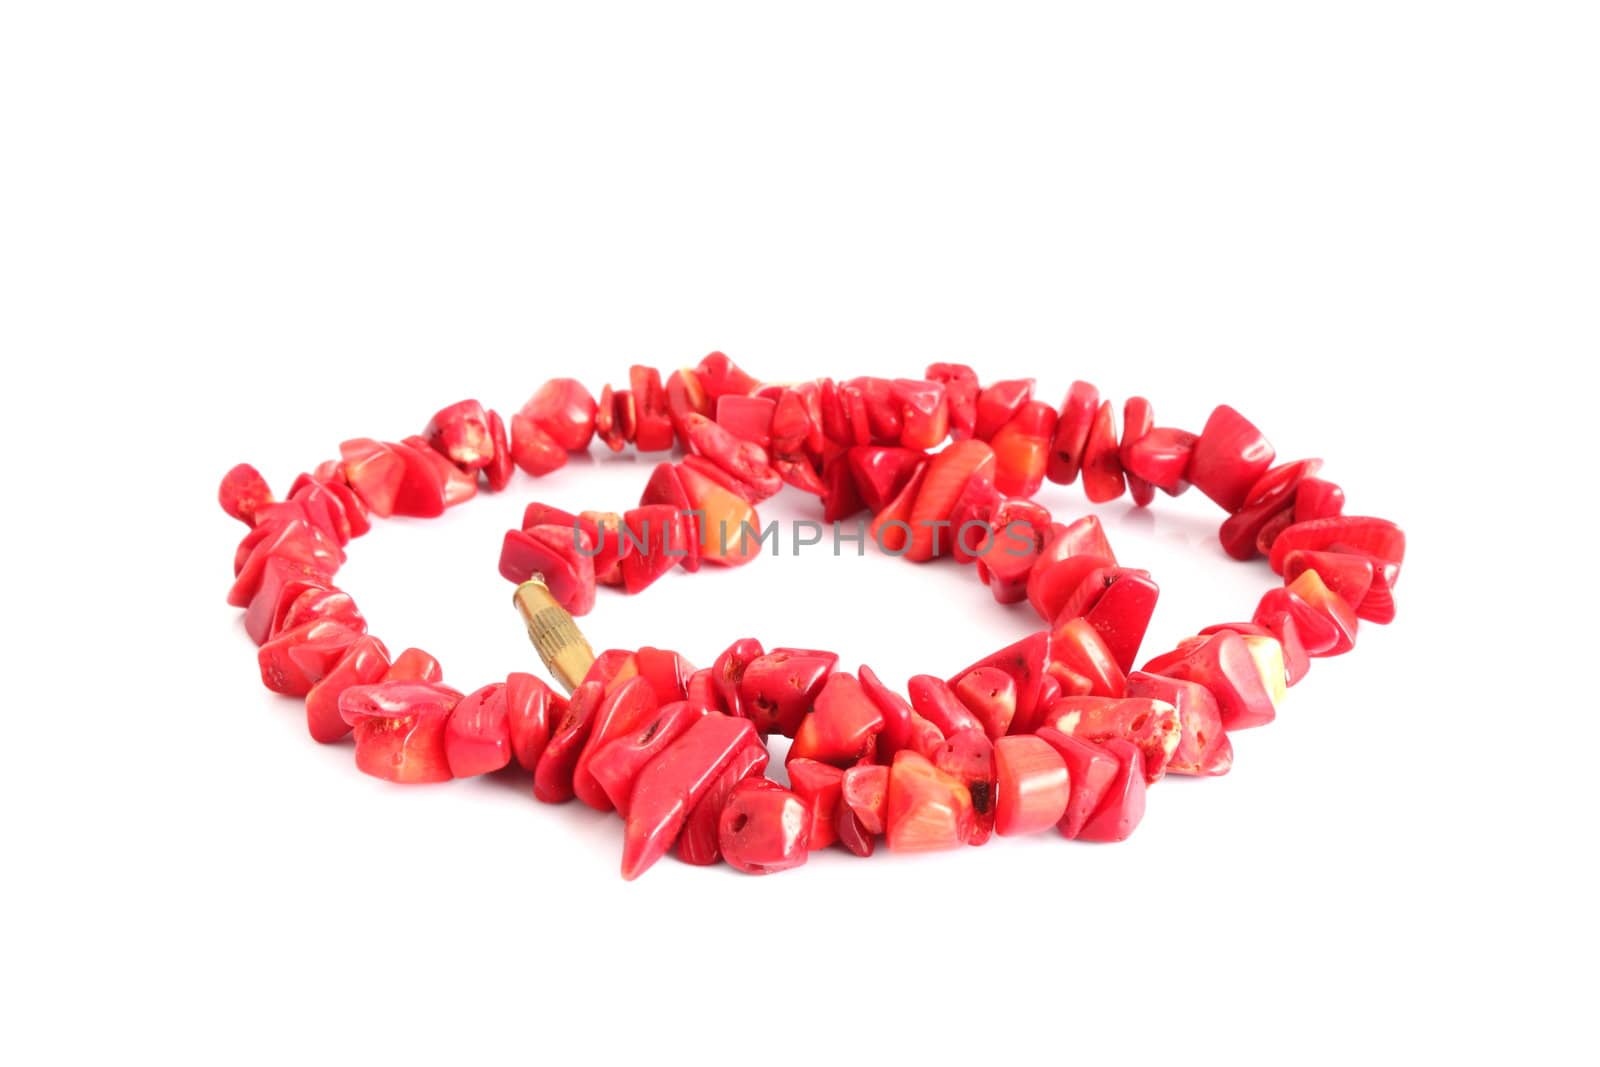 coral beads over white by taviphoto